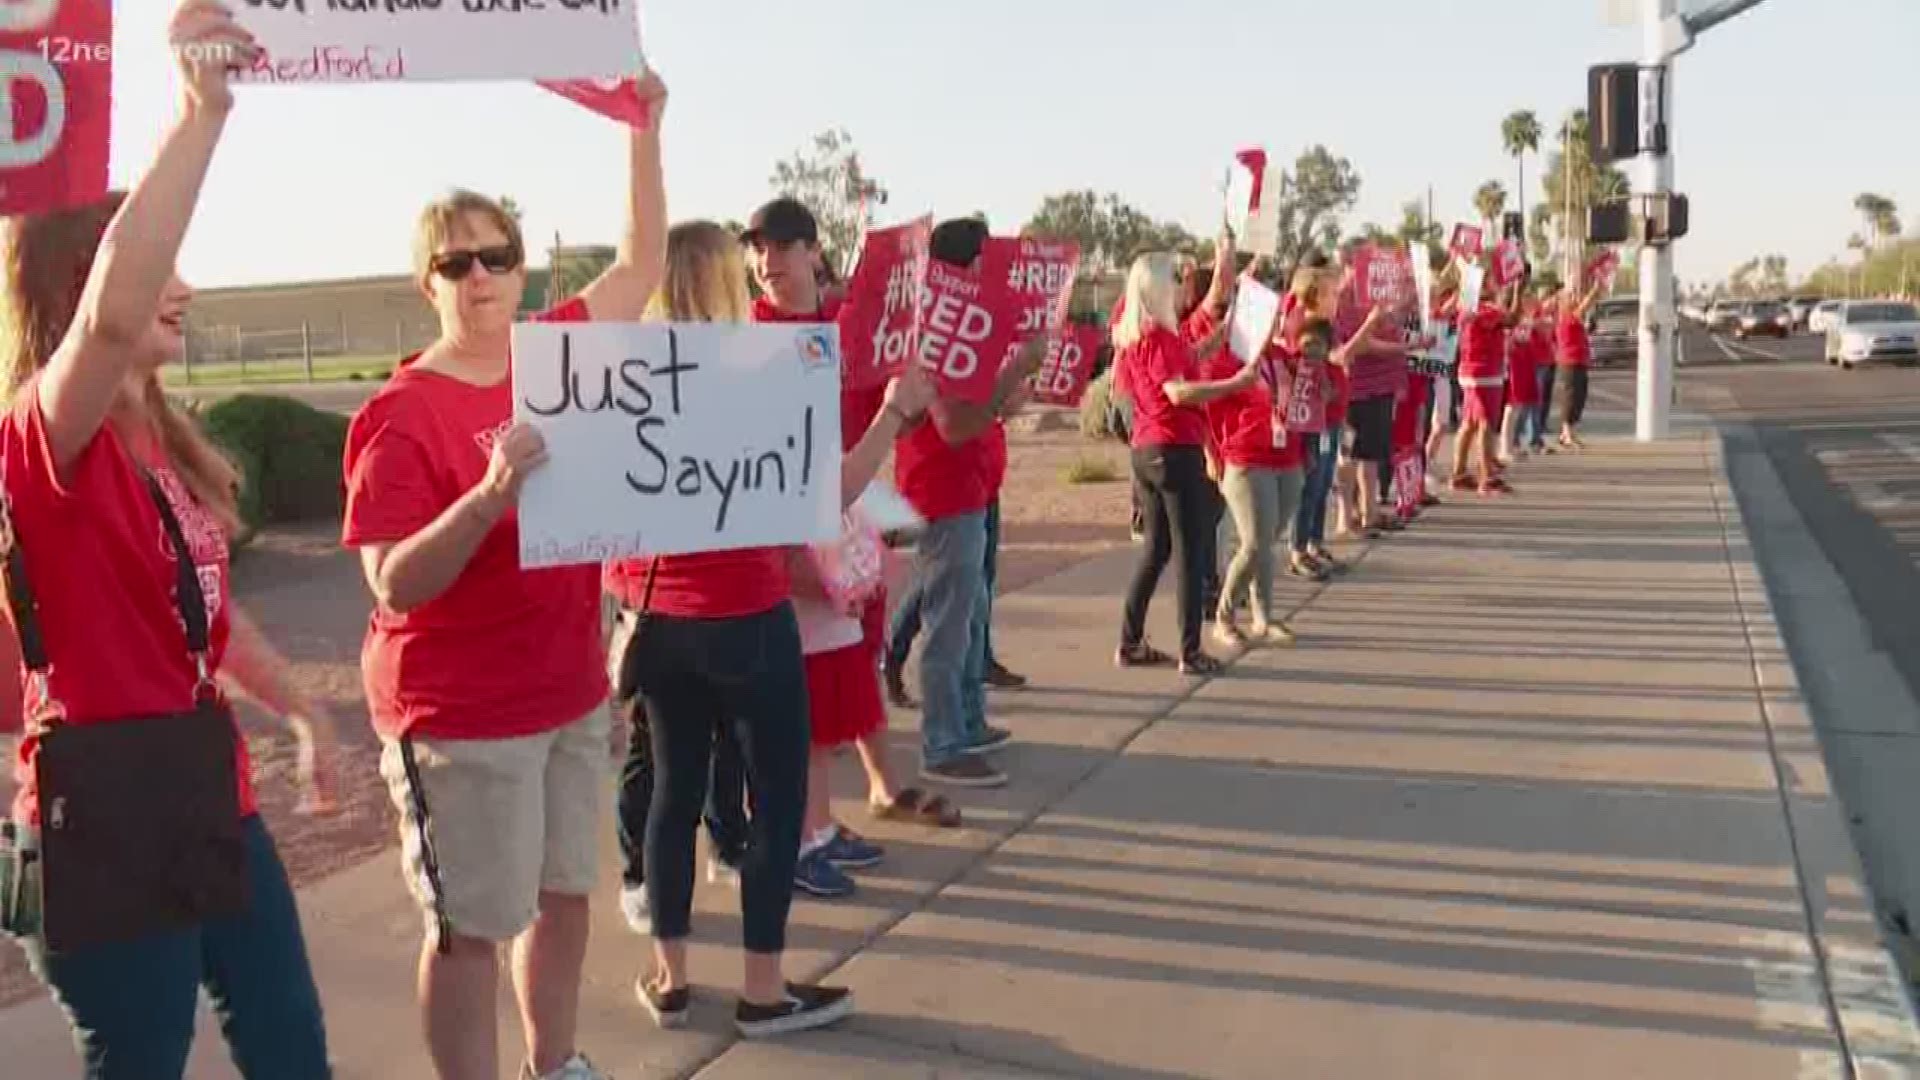 A statewide teacher walkout could end as soon as this weekend, with a call by education leaders for a fall vote on raising taxes to help fund Arizona schools, according to several people familiar with the plans.